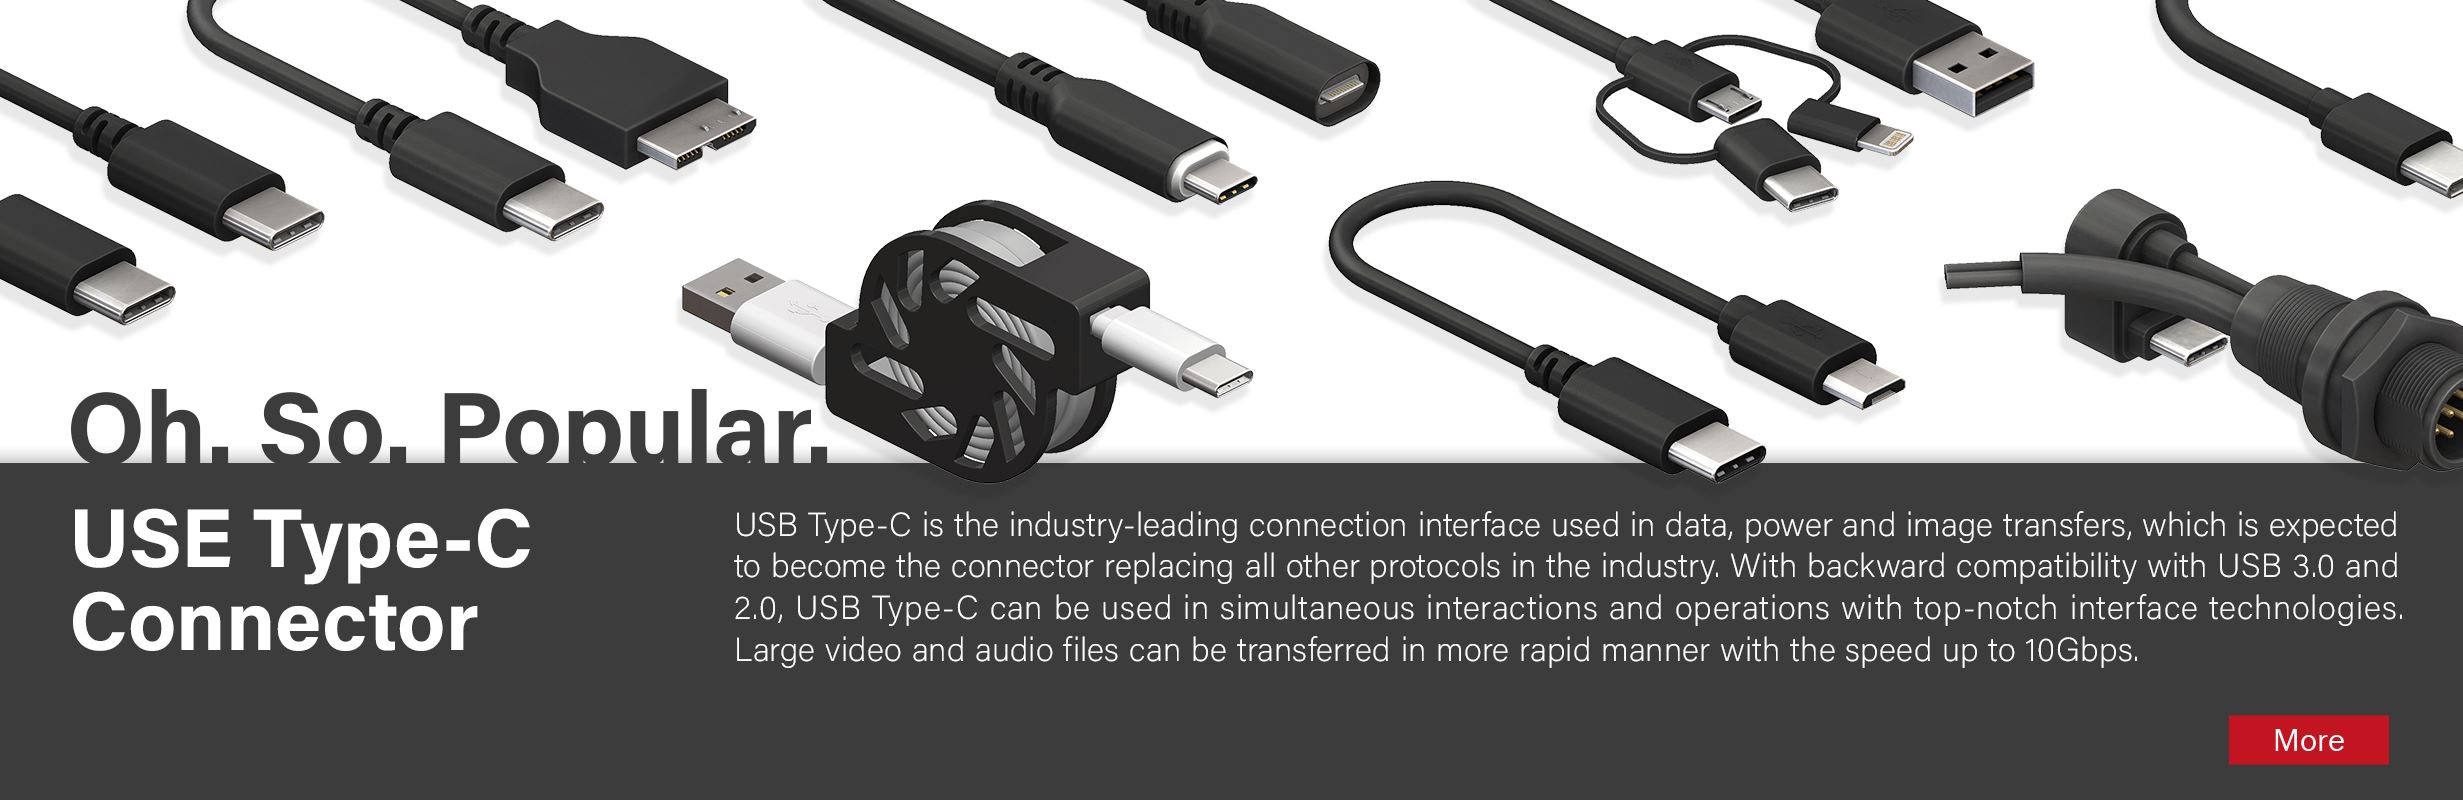 Oh. So. Popular. USE Type-C Connector